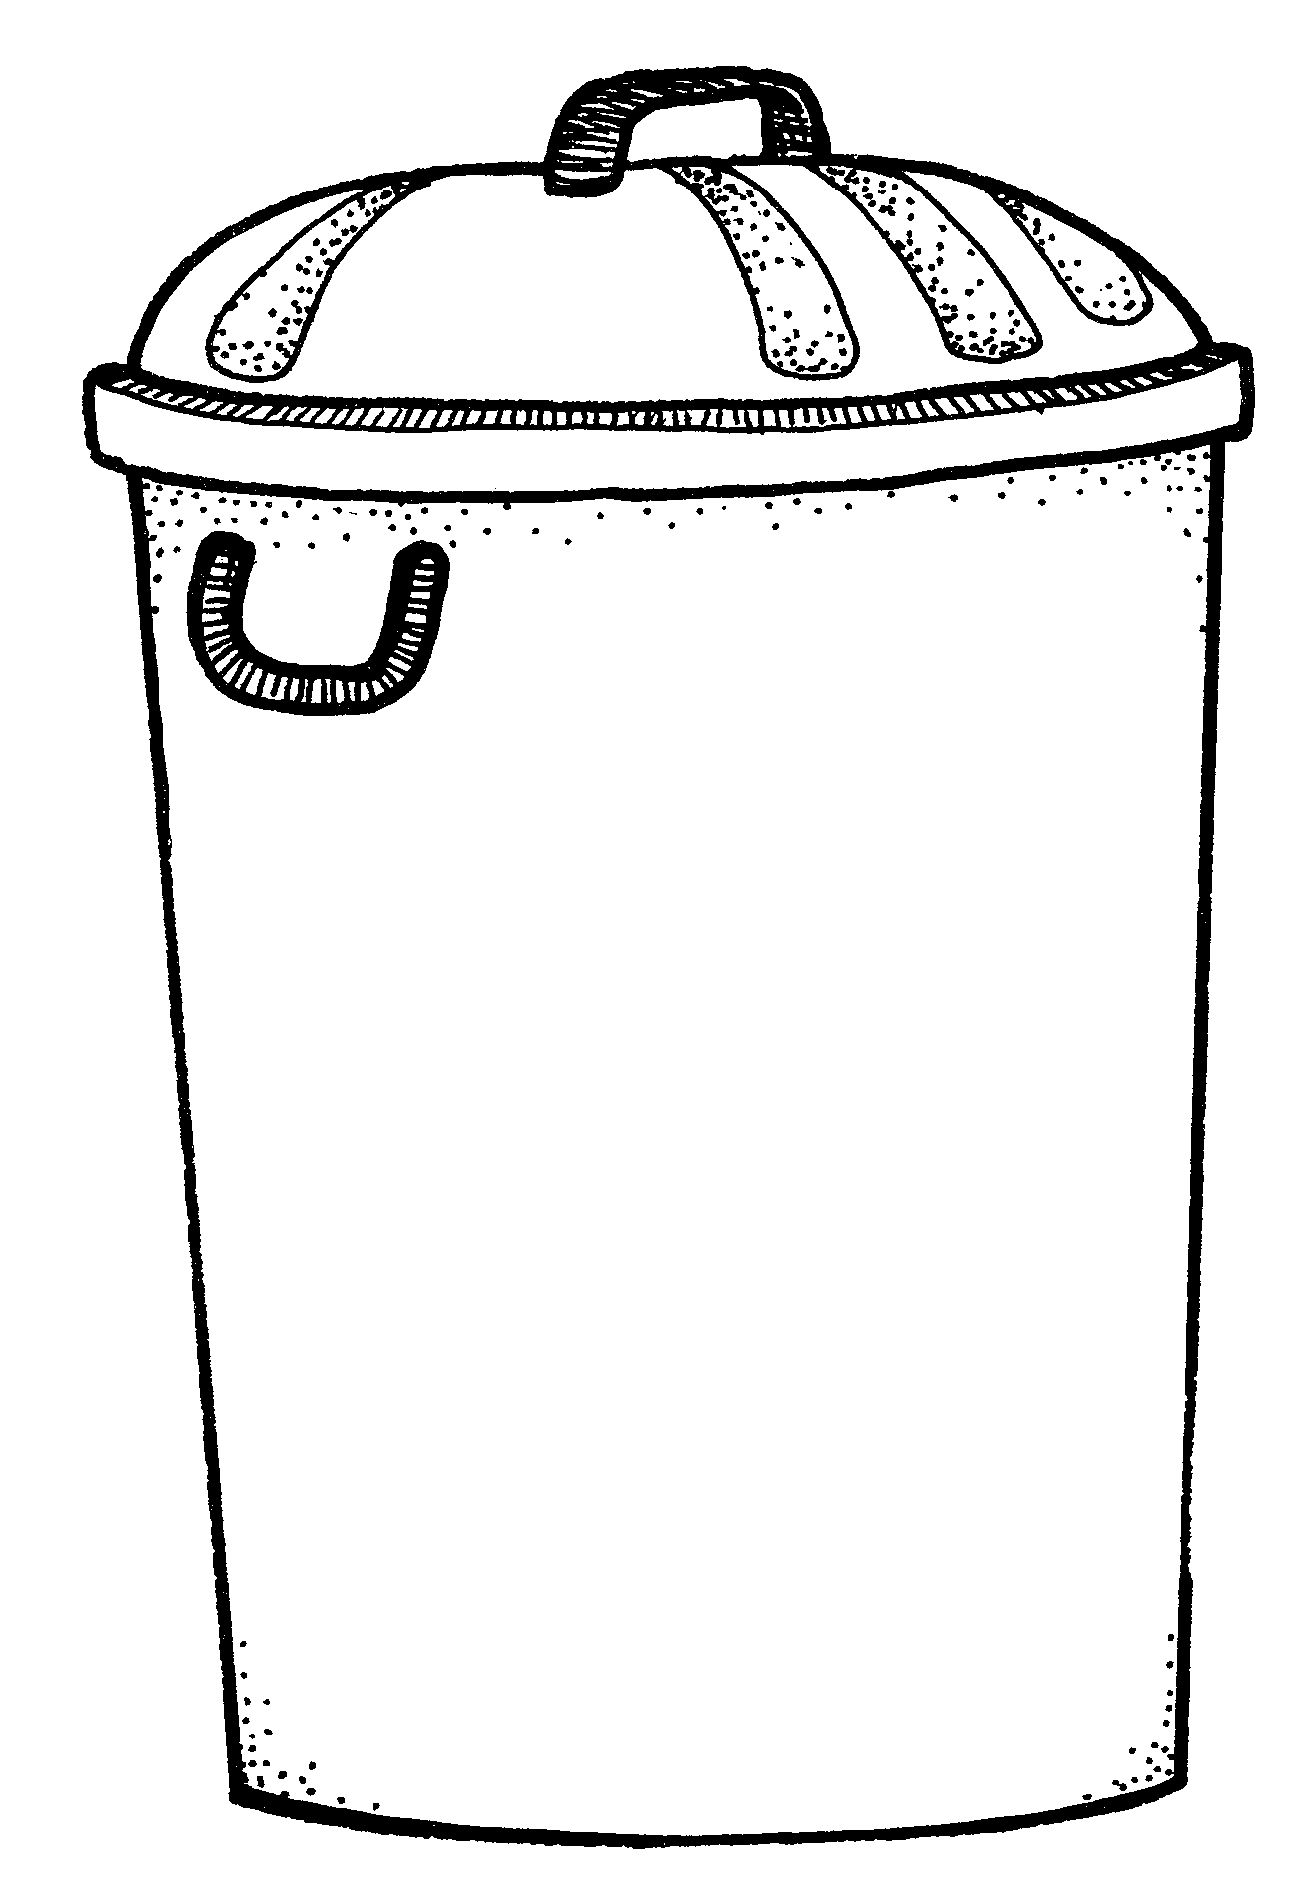 Trash can clipart white